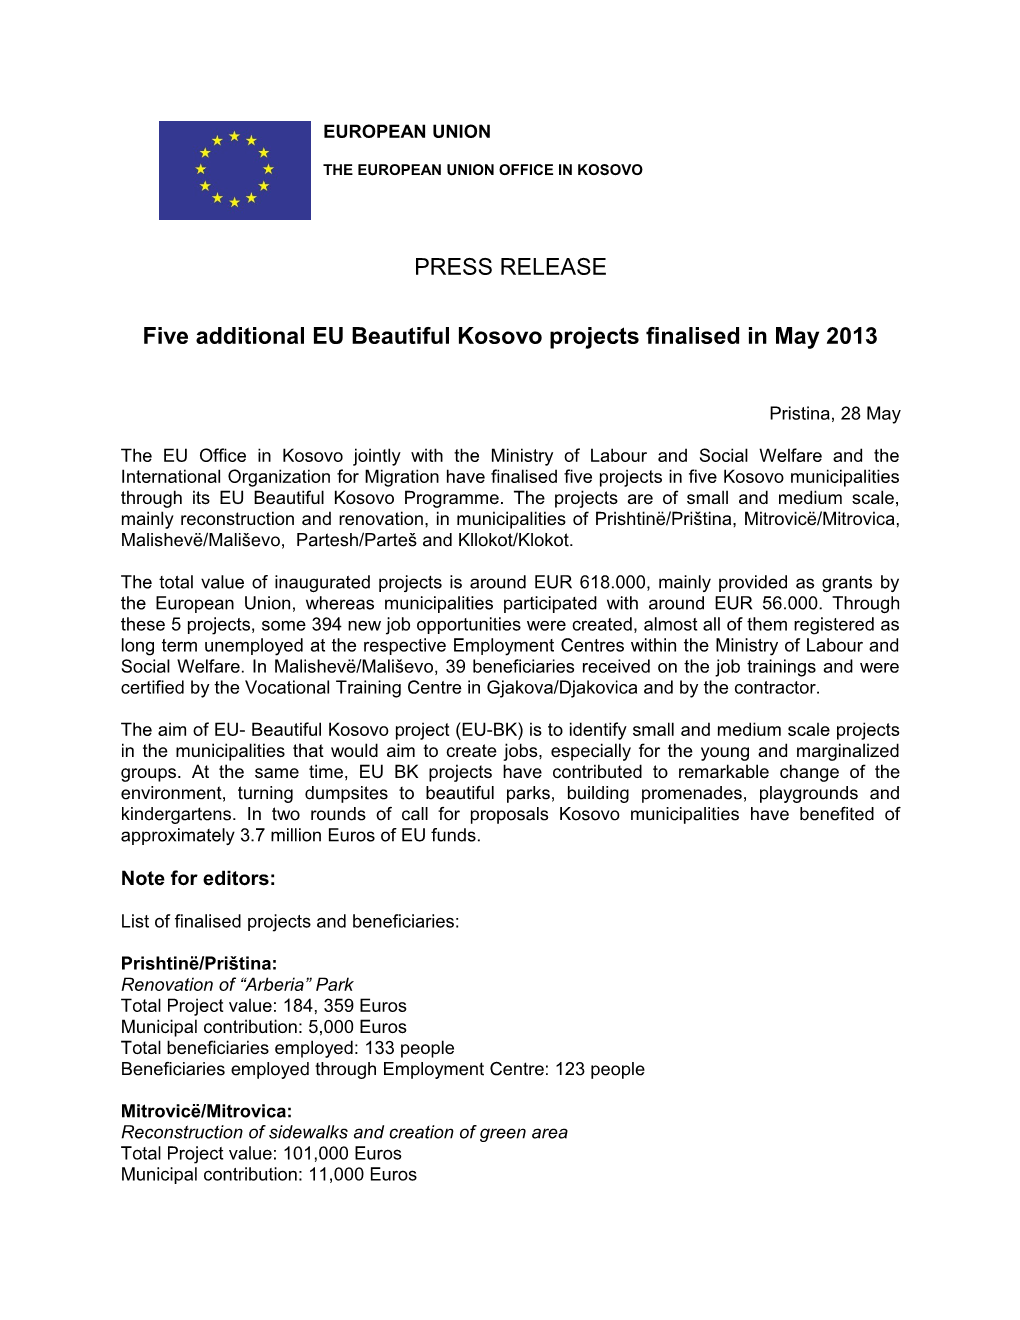 Five Additionaleu Beautiful Kosovo Projects Finalised in May 2013